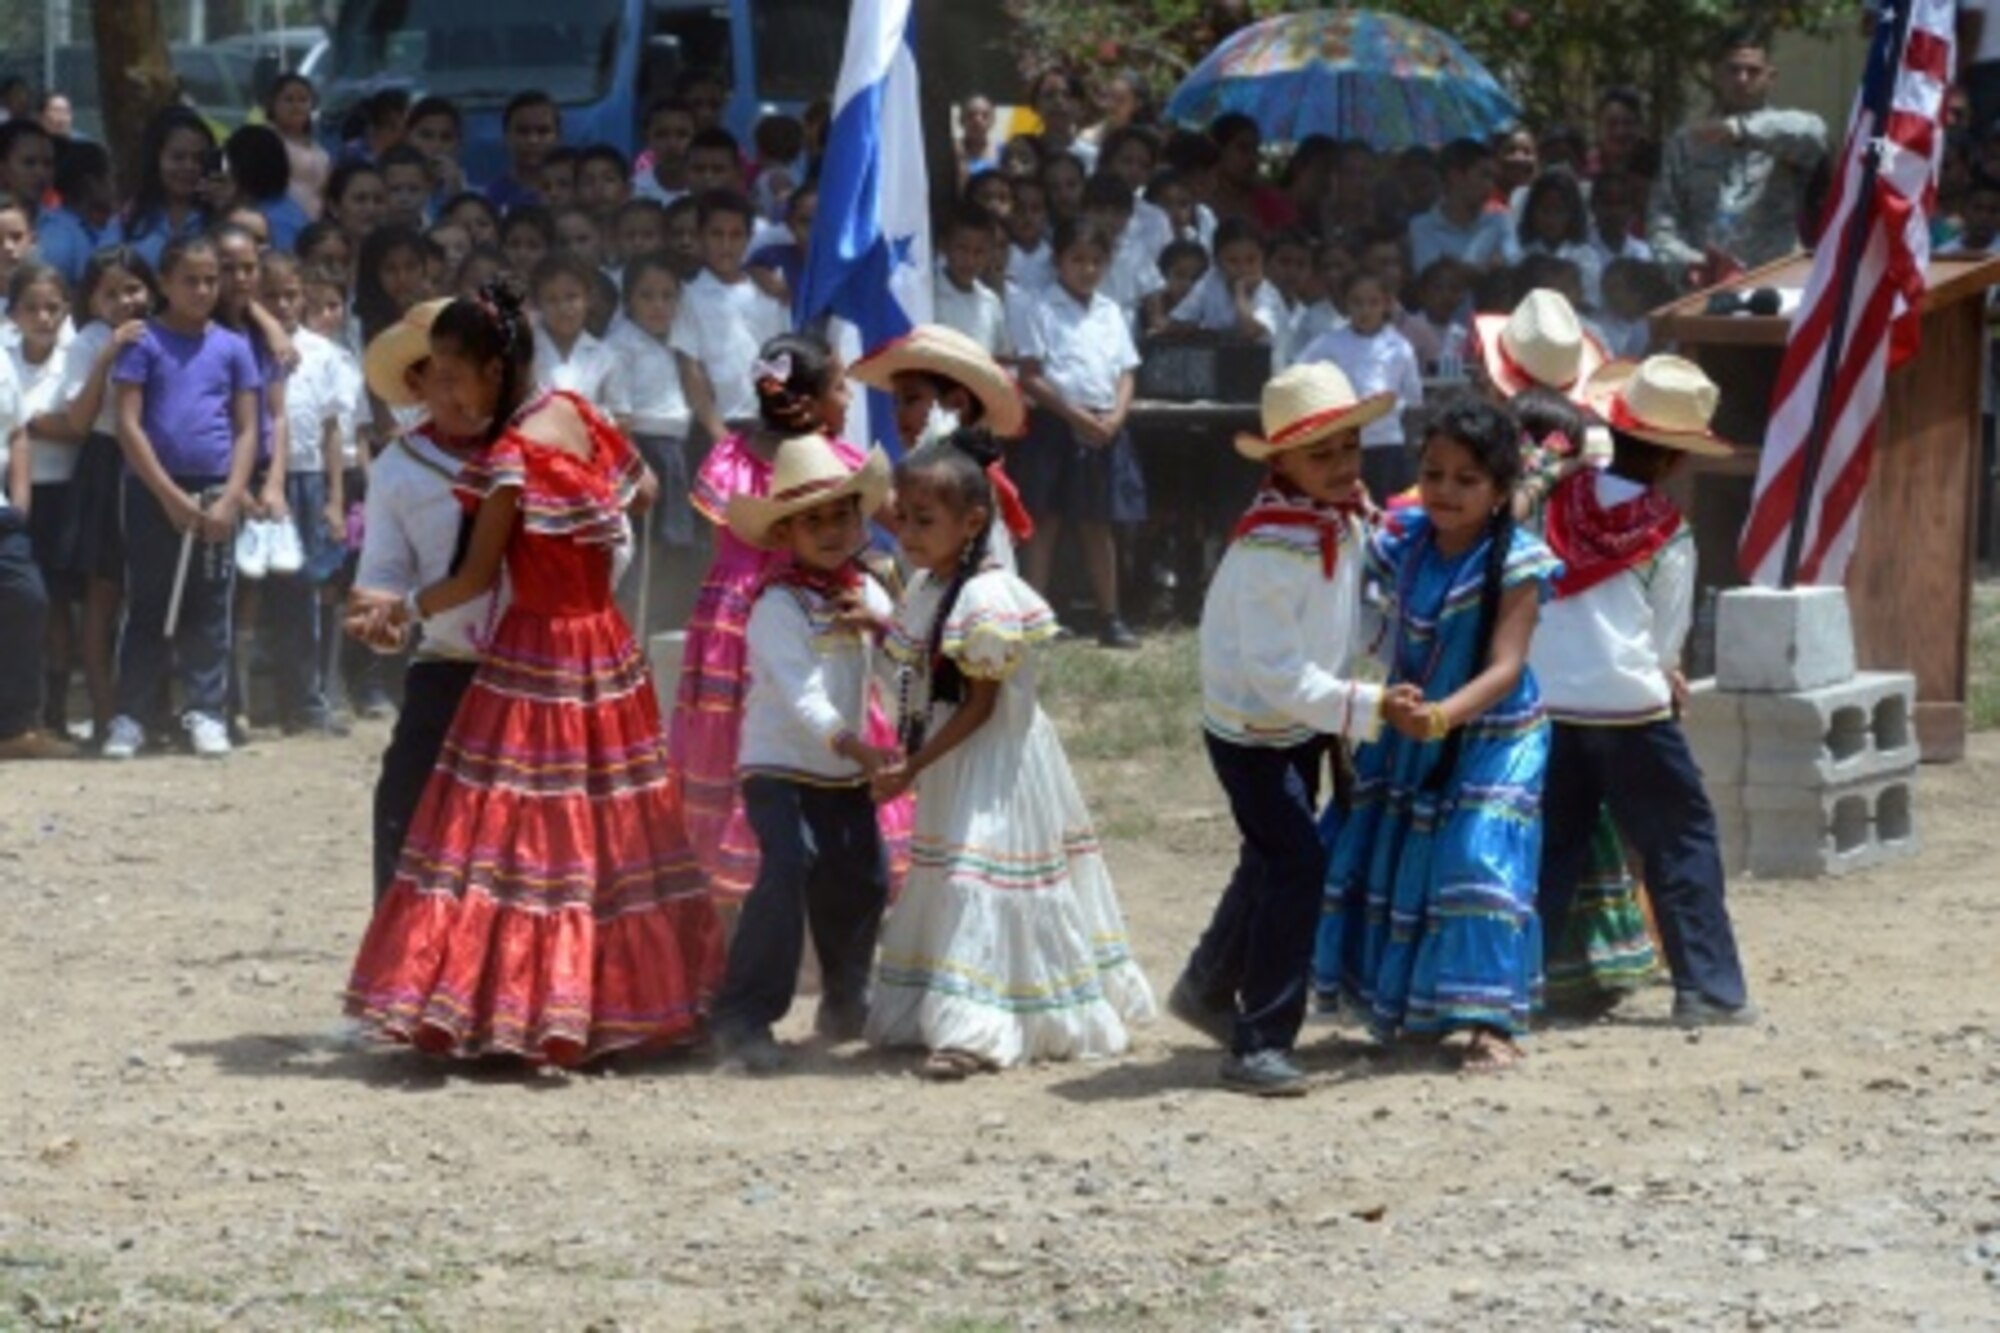 Gabriela Mistral students perform a traditional dance during the ribbon-cutting ceremony at the Gabriela Mistral school in Ocotes Alto, Honduras, July 28, 2015. The ribbon-cutting ceremony celebrated the opening of the new two-classroom schoolhouse. The schoolhouse was one of the key projects that occurred as part of the New Horizons Honduras 2015 training exercise taking place in and around Trujillo, Honduras. 
 New Horizons was launched in the 1980s and is an annual joint humanitarian assistance exercise that U.S. Southern Command conducts with a partner nation in Central America, South America or the Caribbean. The exercise improves joint training readiness of U.S. and partner nation civil engineers, medical professionals and support personnel through humanitarian assistance activities. (U.S. Air Force photo by Capt. David J. Murphy/Released)
